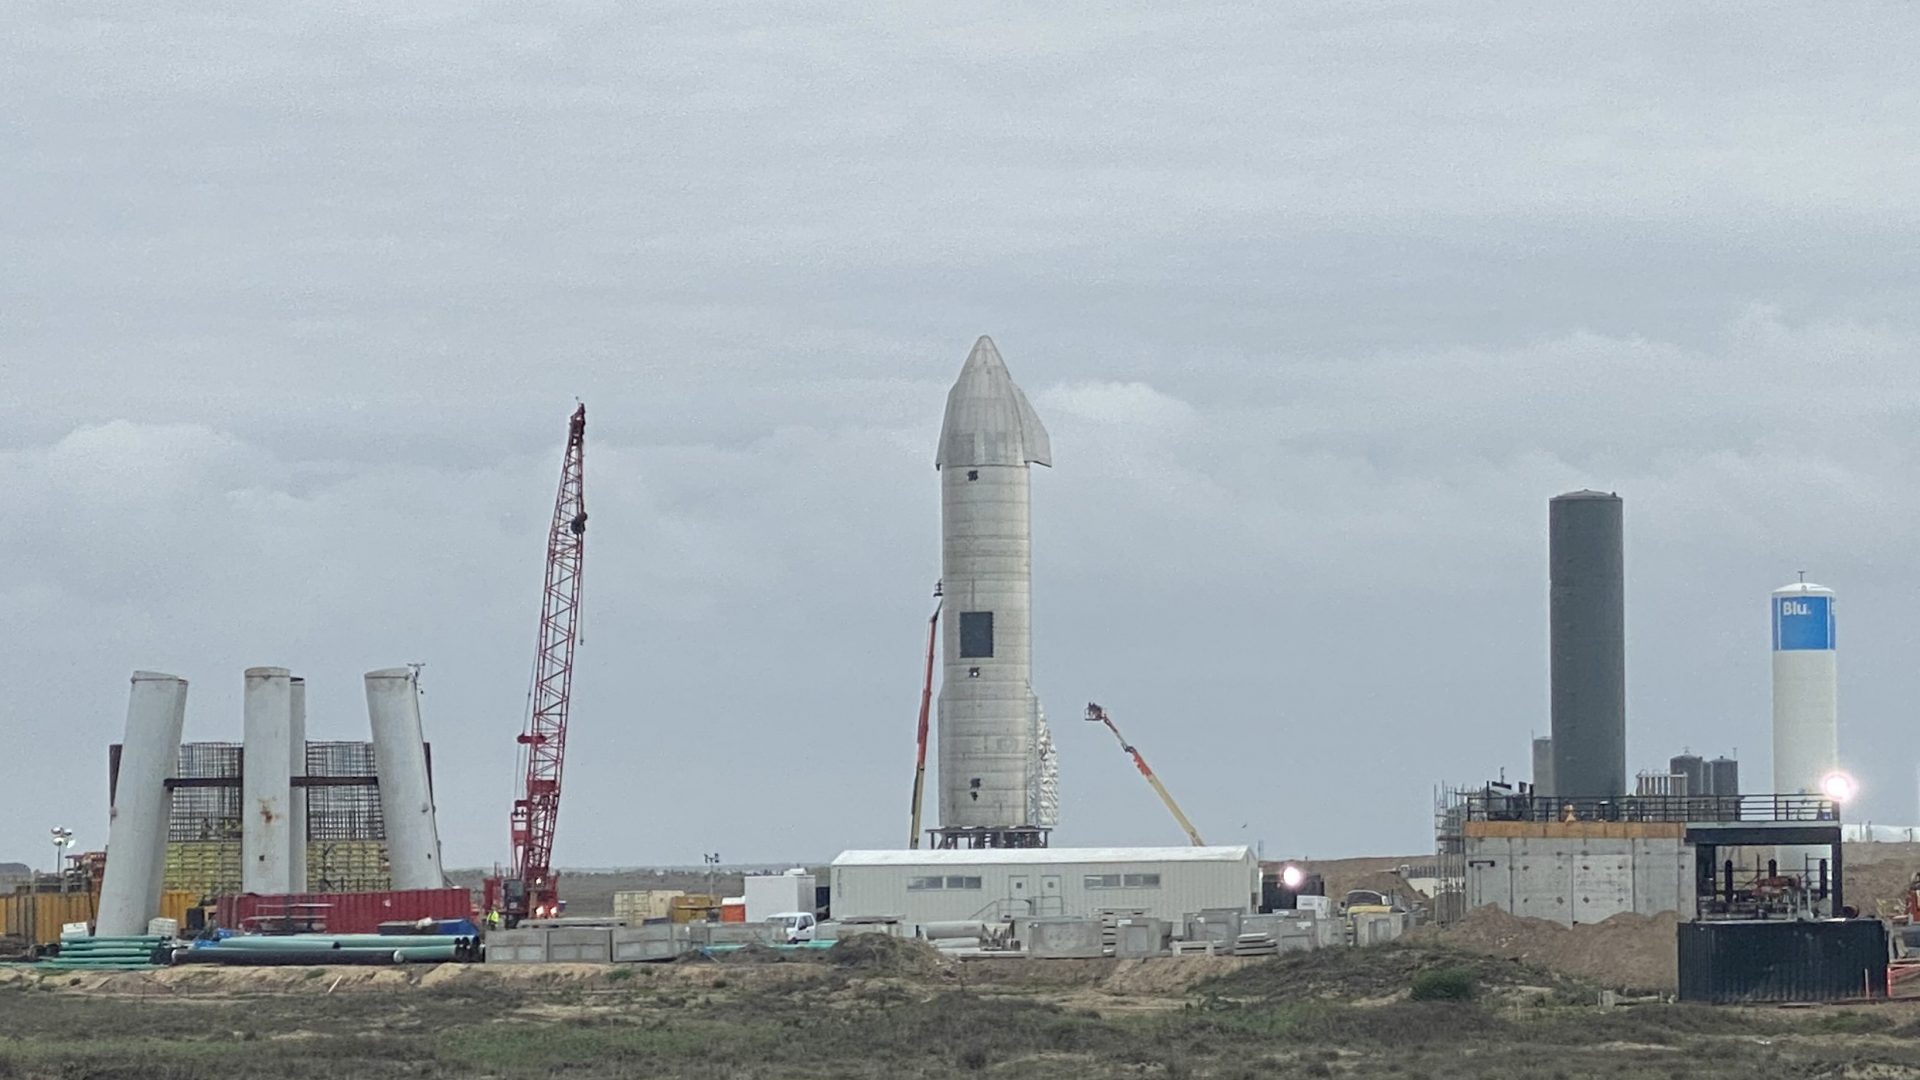 SpaceX’s SN15 Starship prototype rolls out to commence pad